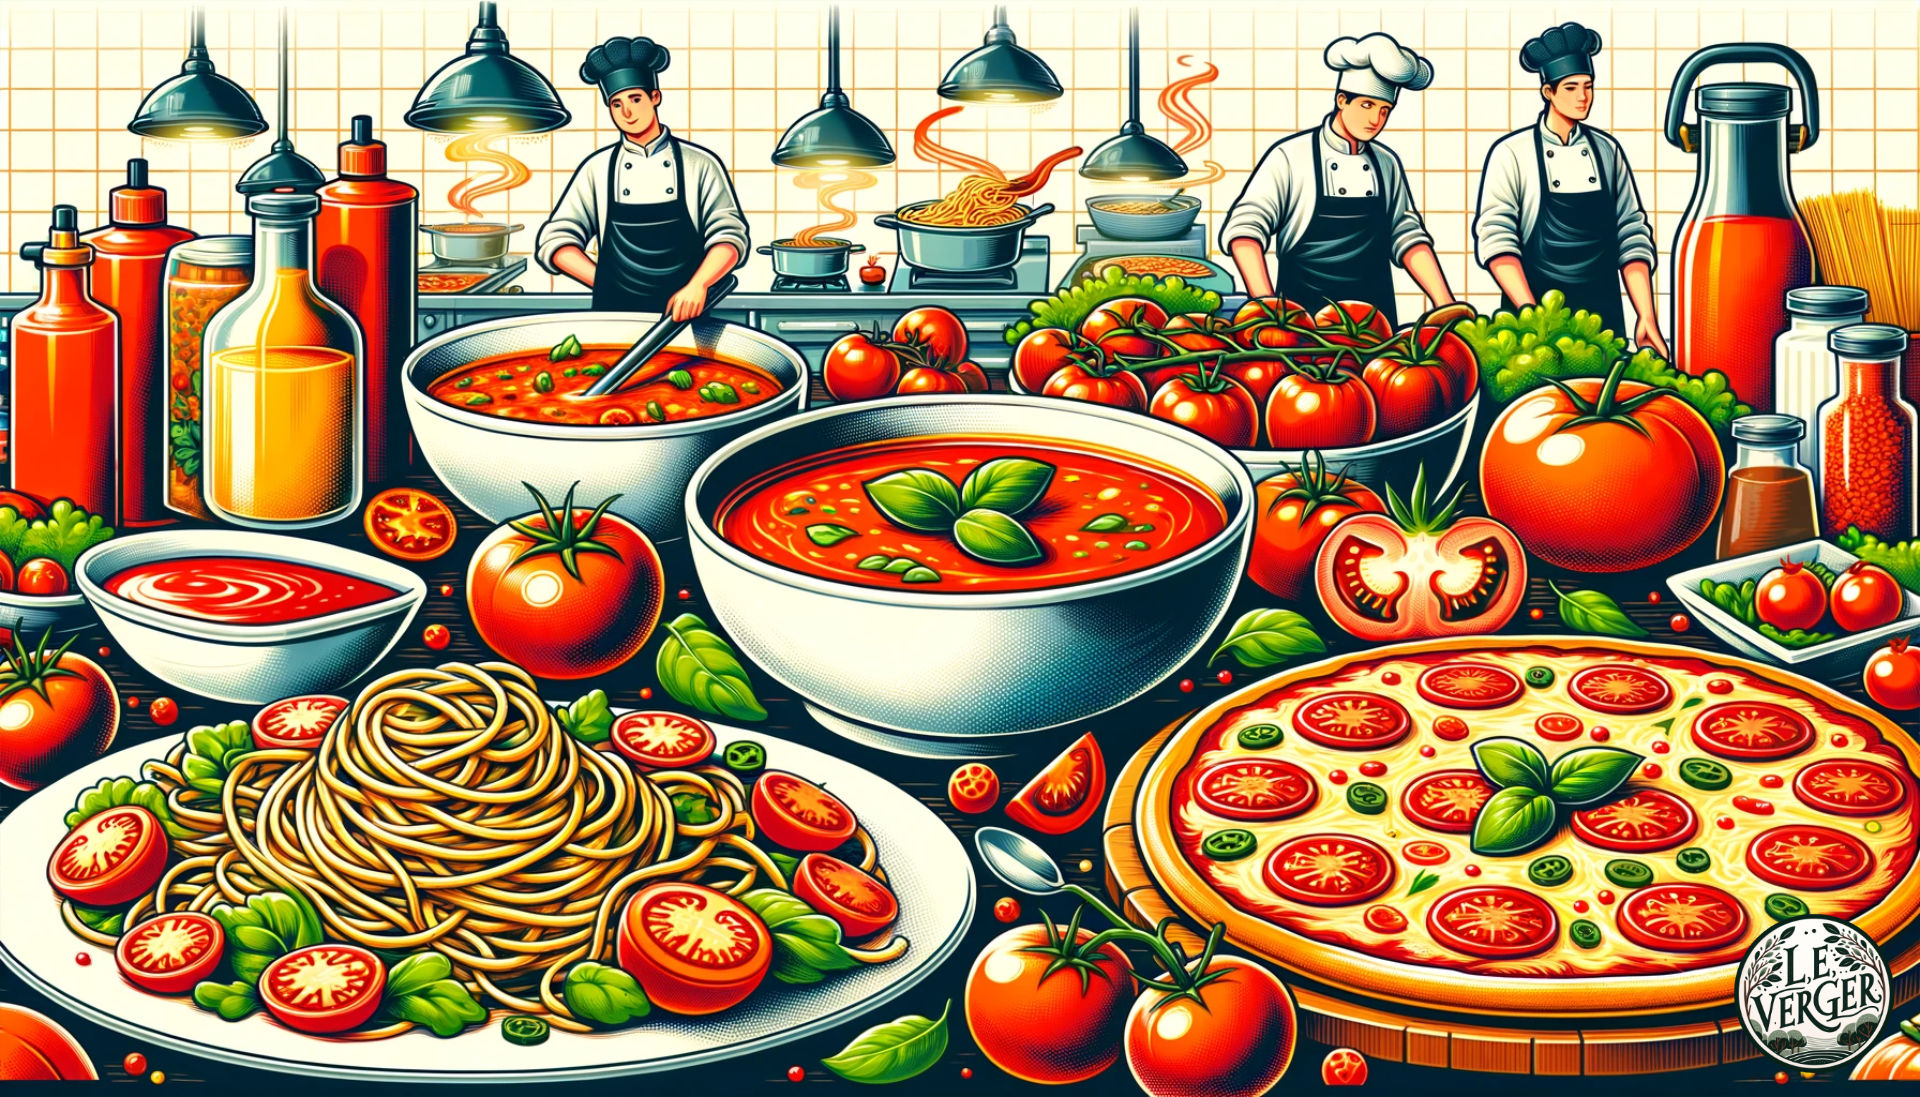 Illustration of a vibrant kitchen scene showcasing various tomato-based dishes. There's a bowl of tomato soup, a plate of spaghetti with tomato sauce, a fresh tomato salad, and a pizza with tomato slices and sauce. Chefs are in the background preparing dishes.